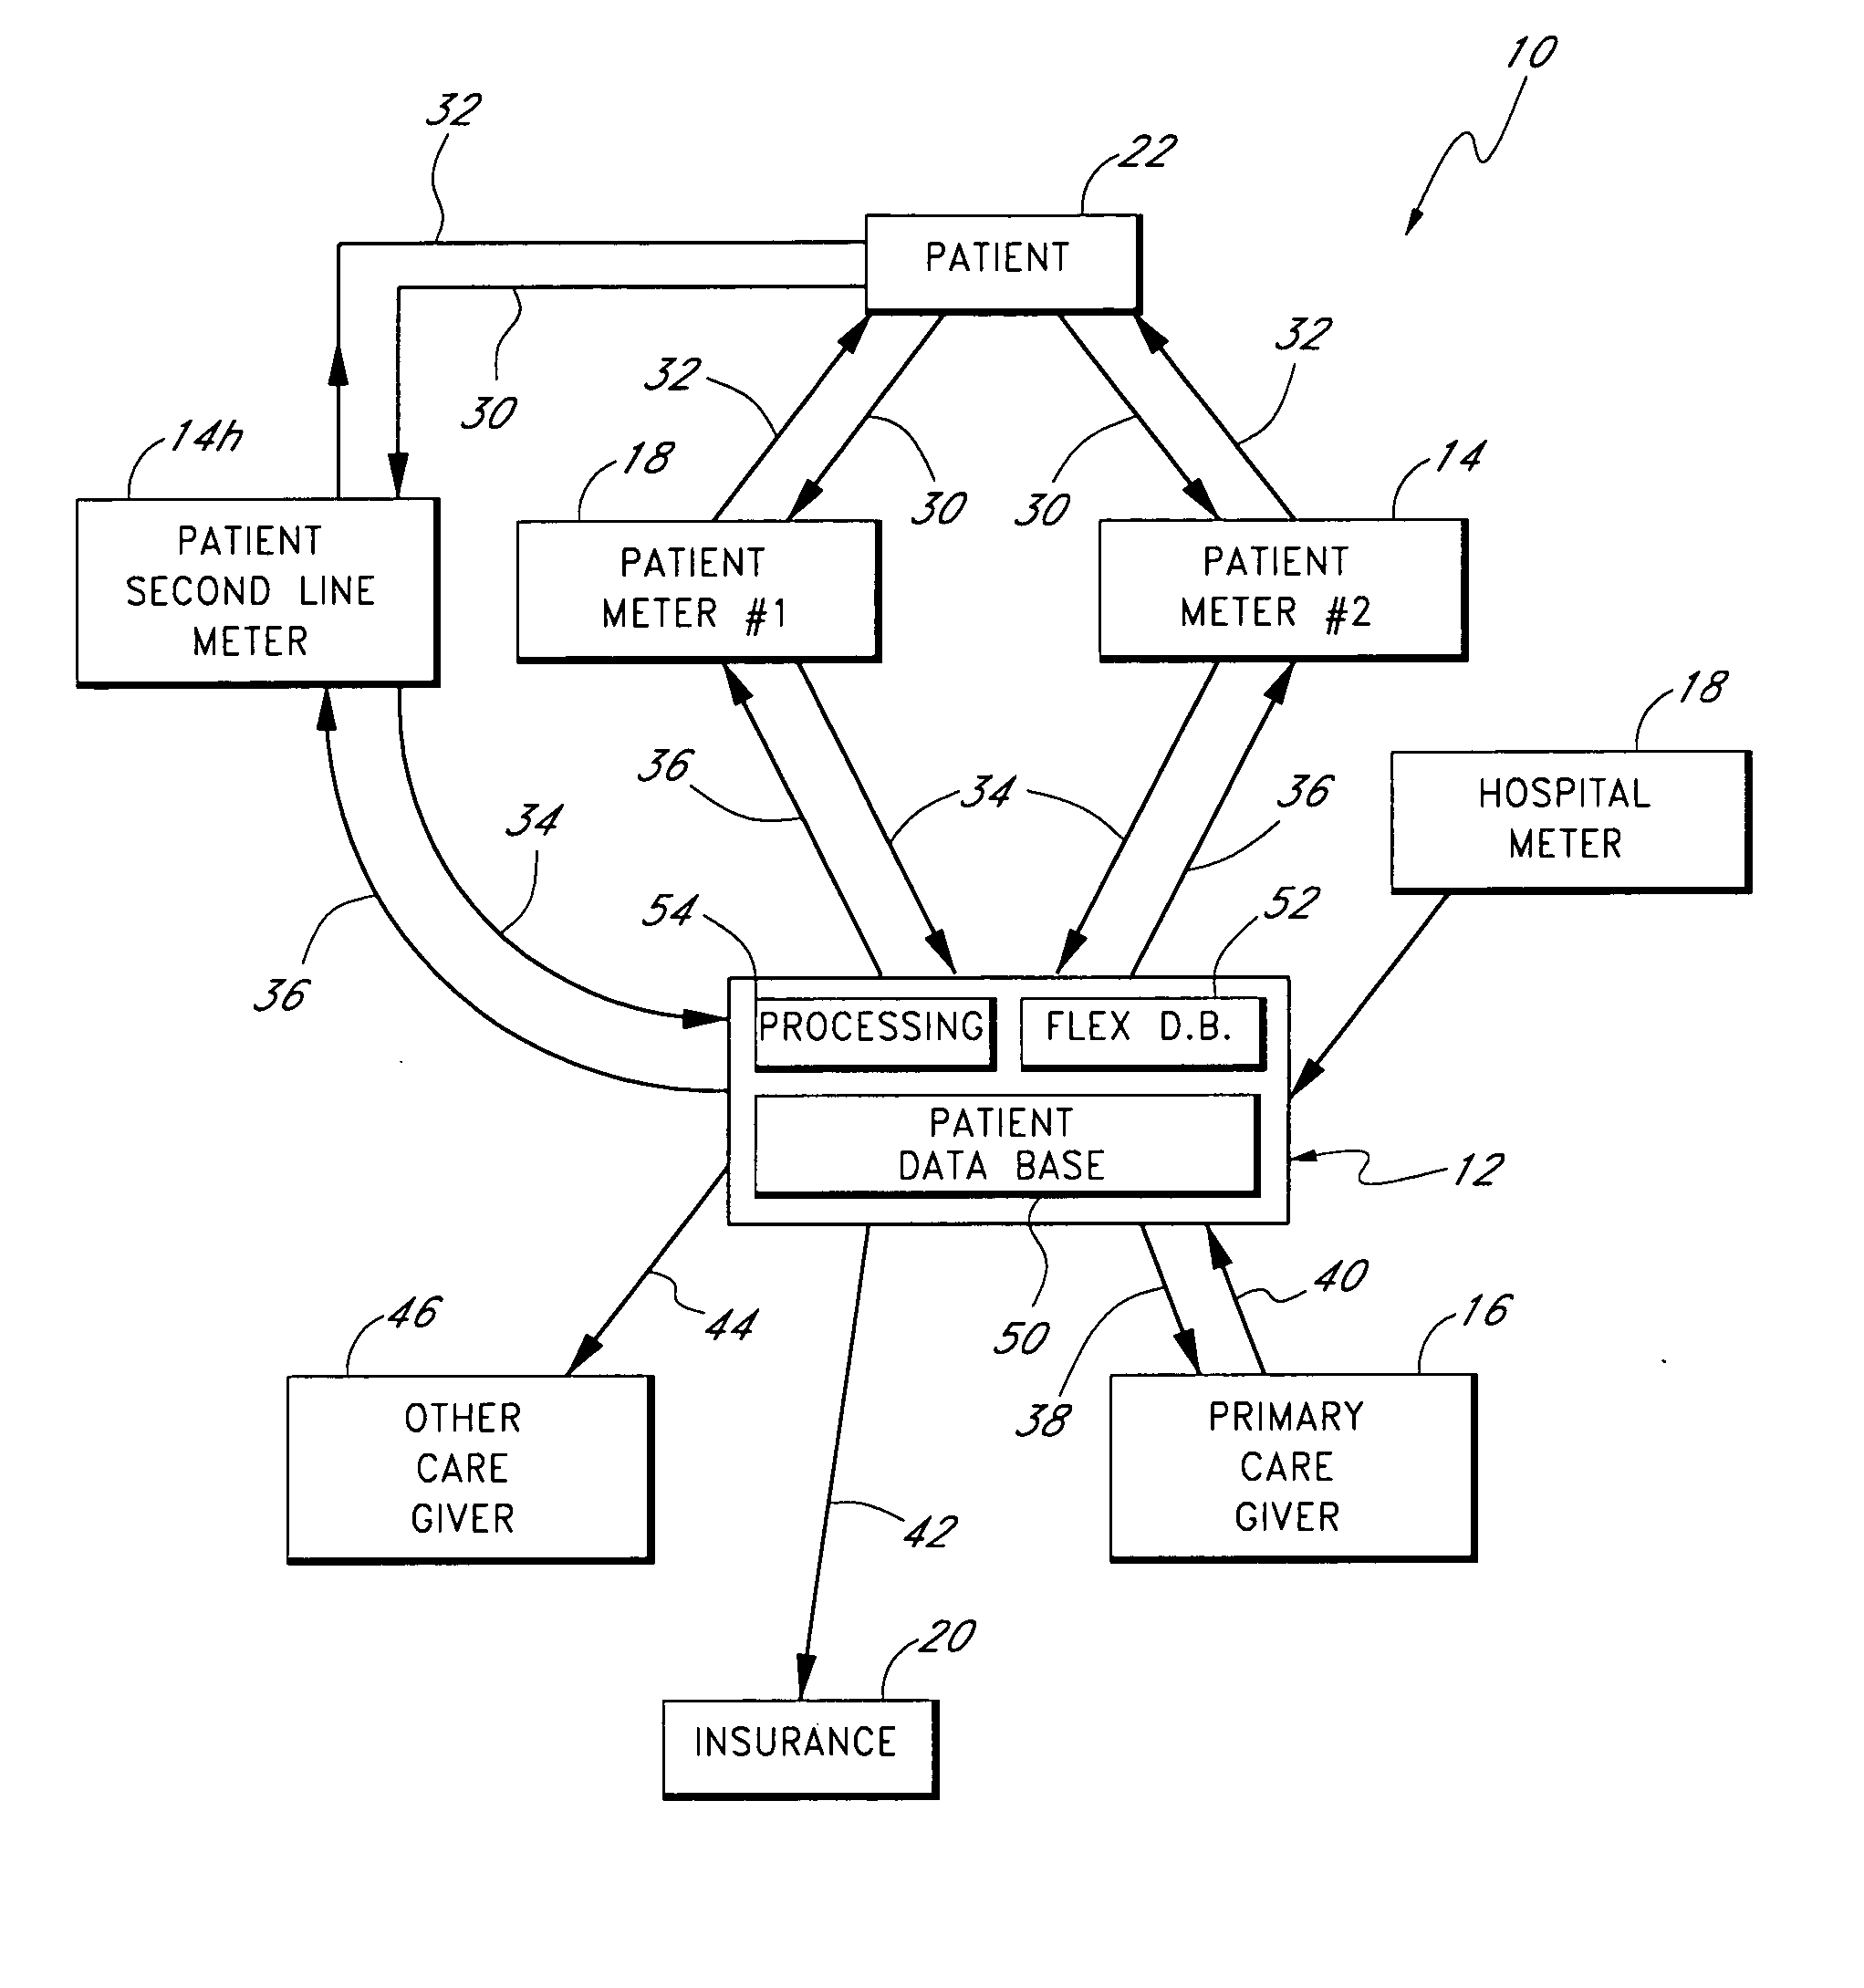 System and method for managing a chronic medical condition